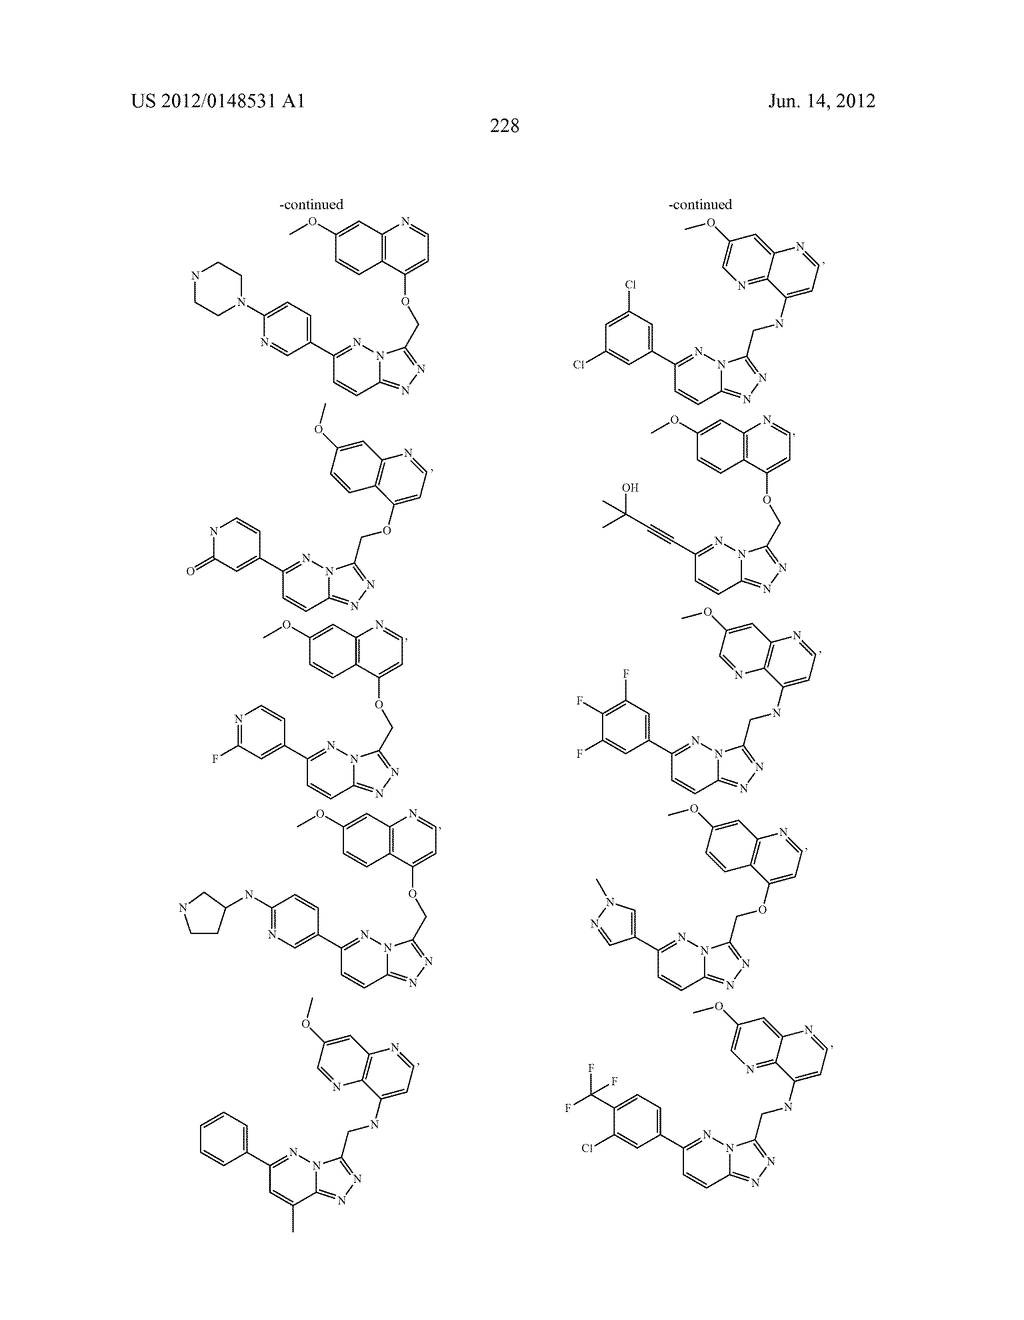 FUSED HETEROCYCLIC DERIVATIVES AND METHODS OF USE - diagram, schematic, and image 229